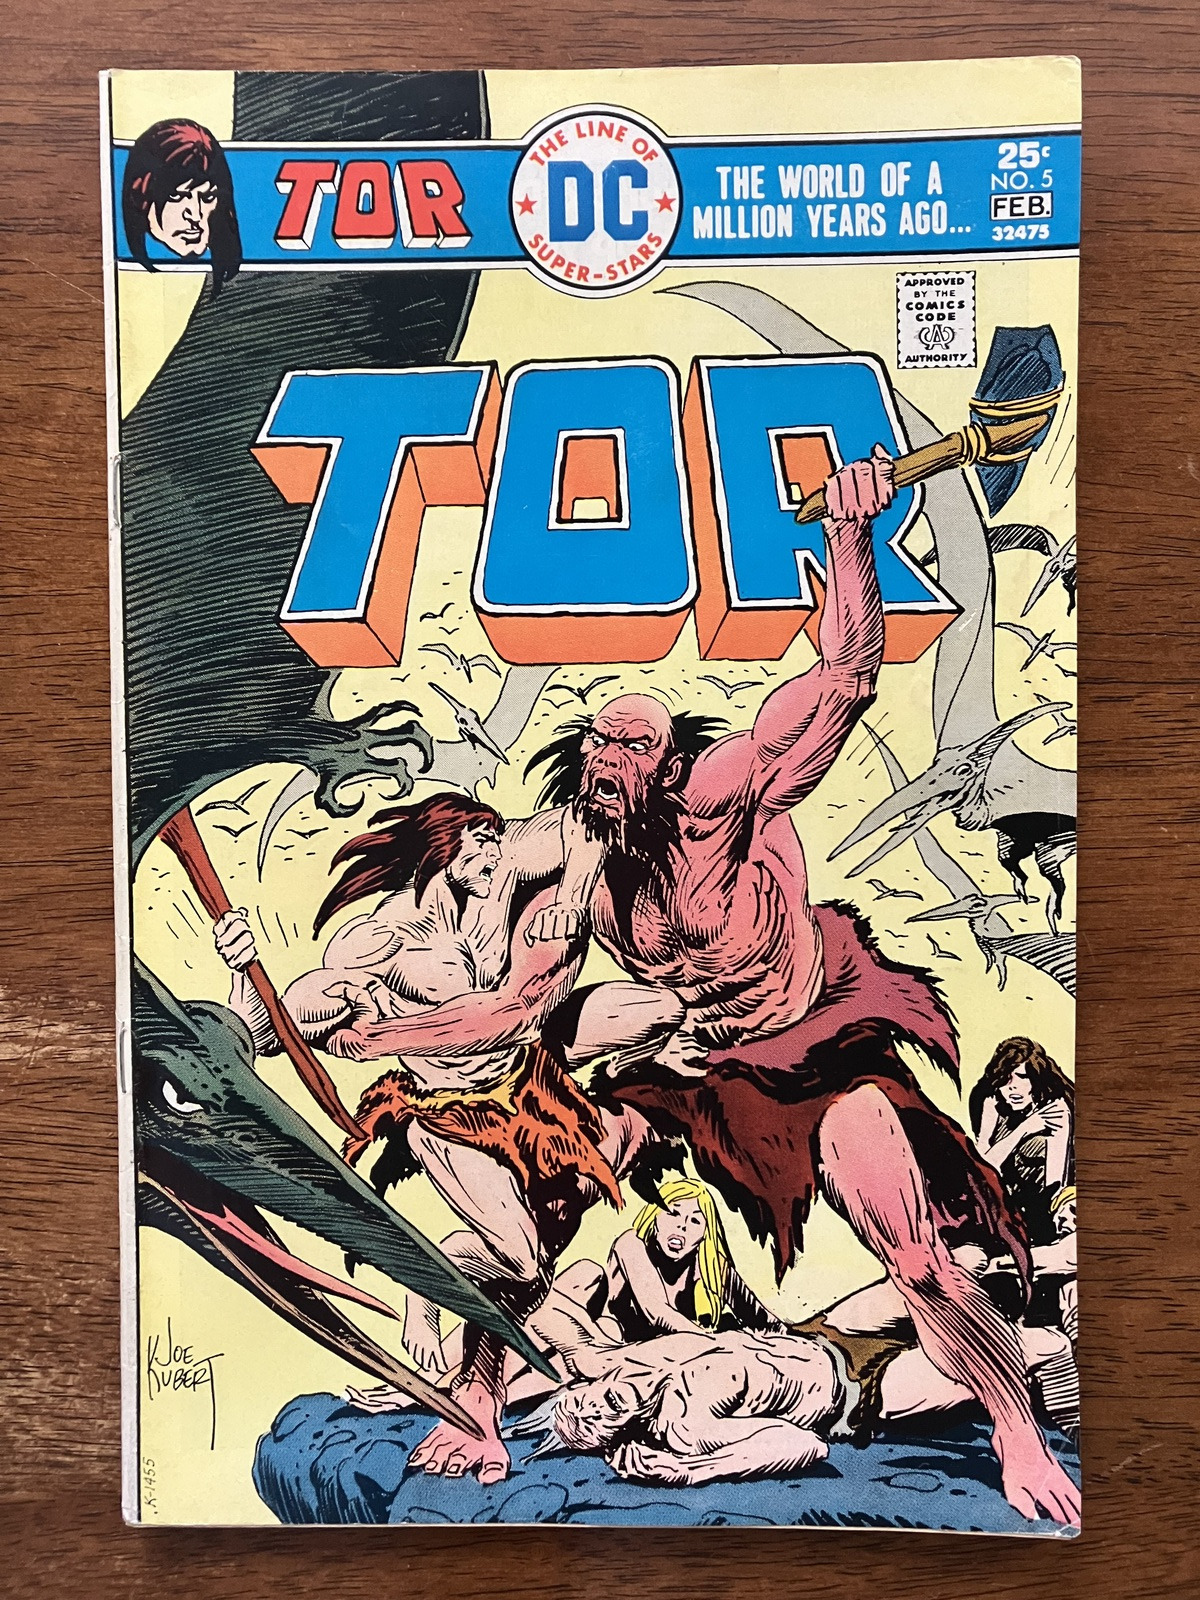 TOR # 5 VF/NM 9.0 Solid Spine, Bright Cover Colors 